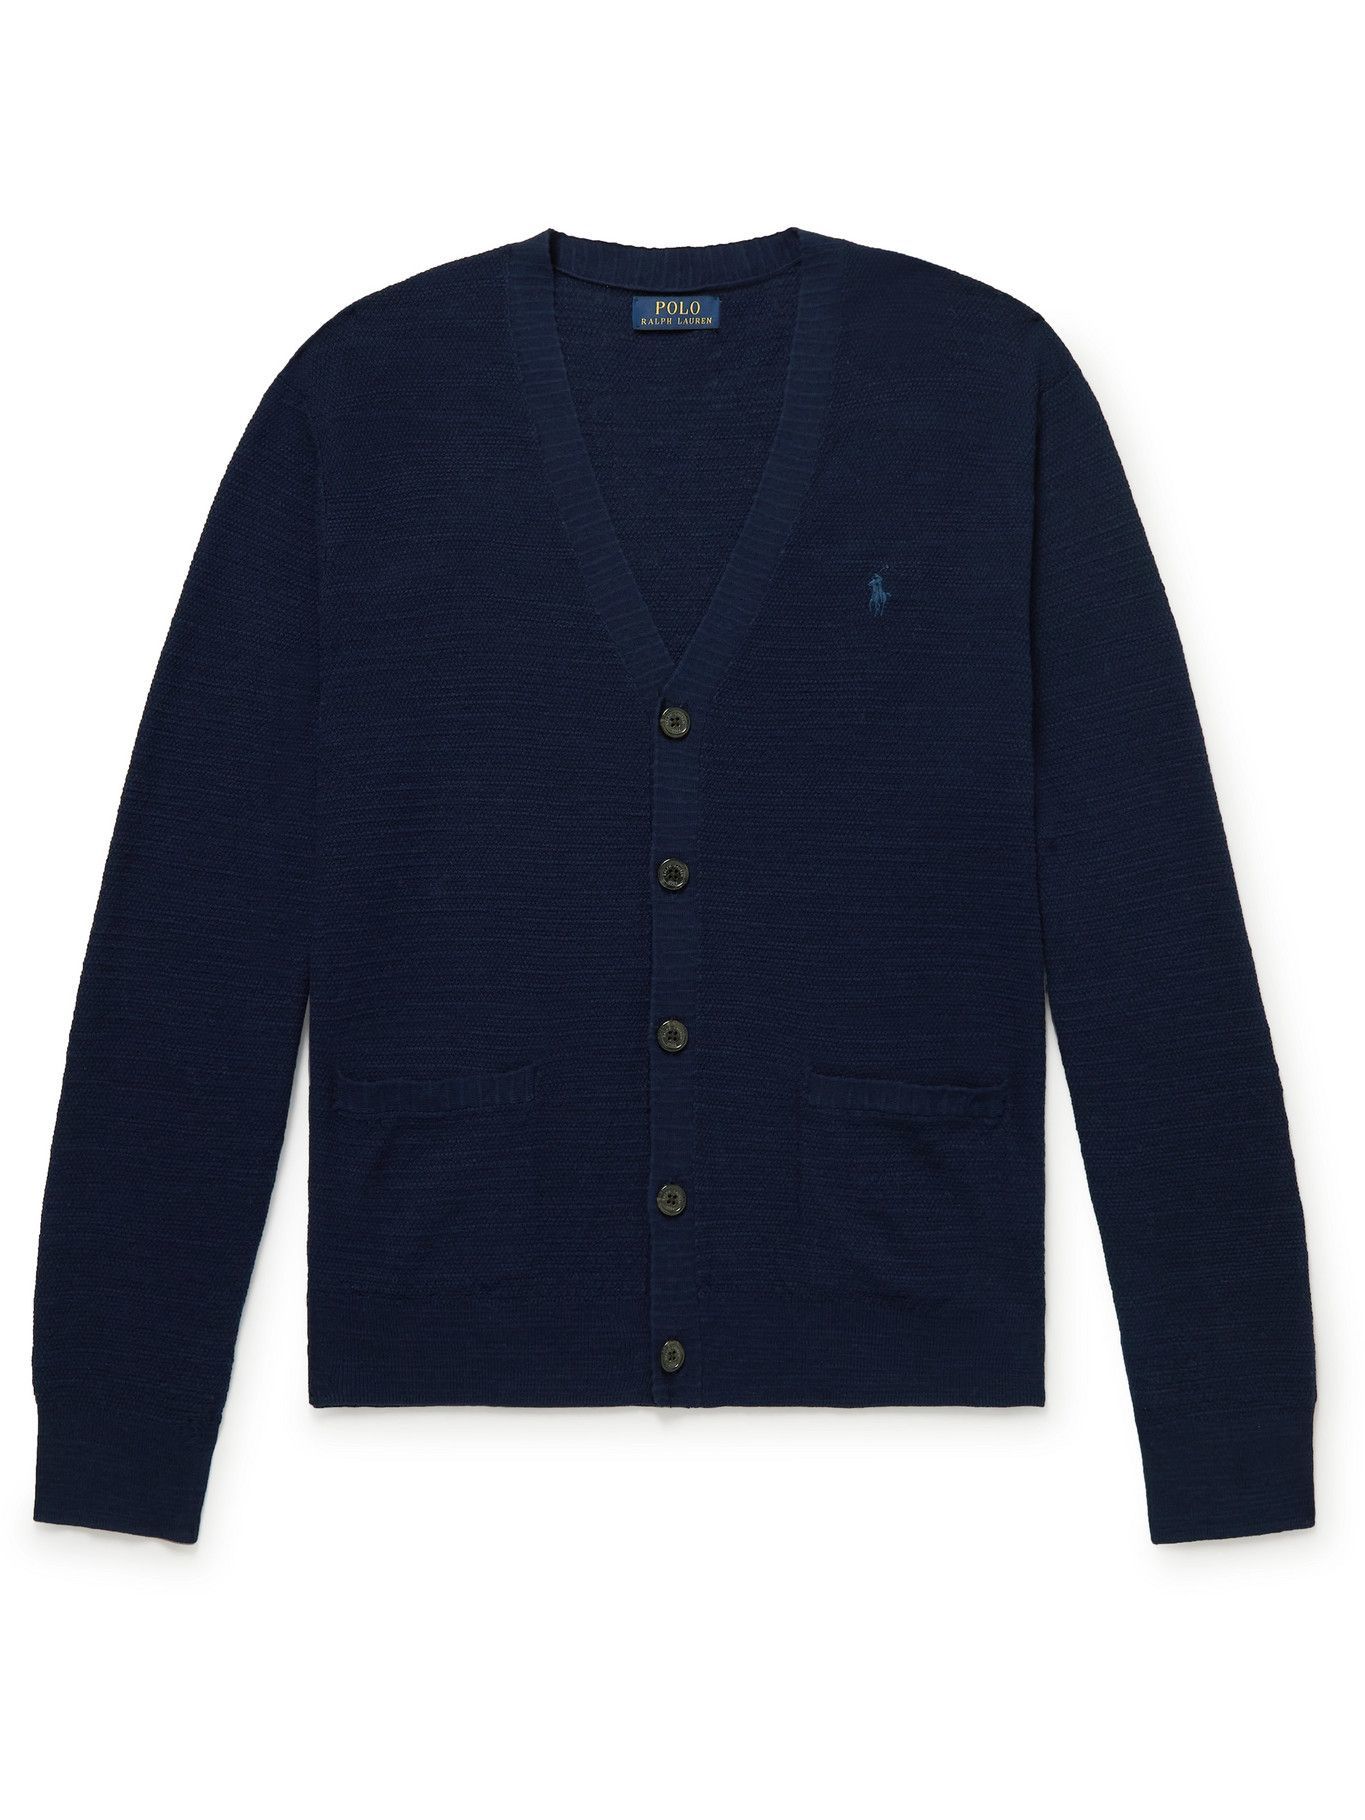 POLO RALPH LAUREN - Logo-Embroidered Waffle-Knit Cotton and Linen-Blend ...